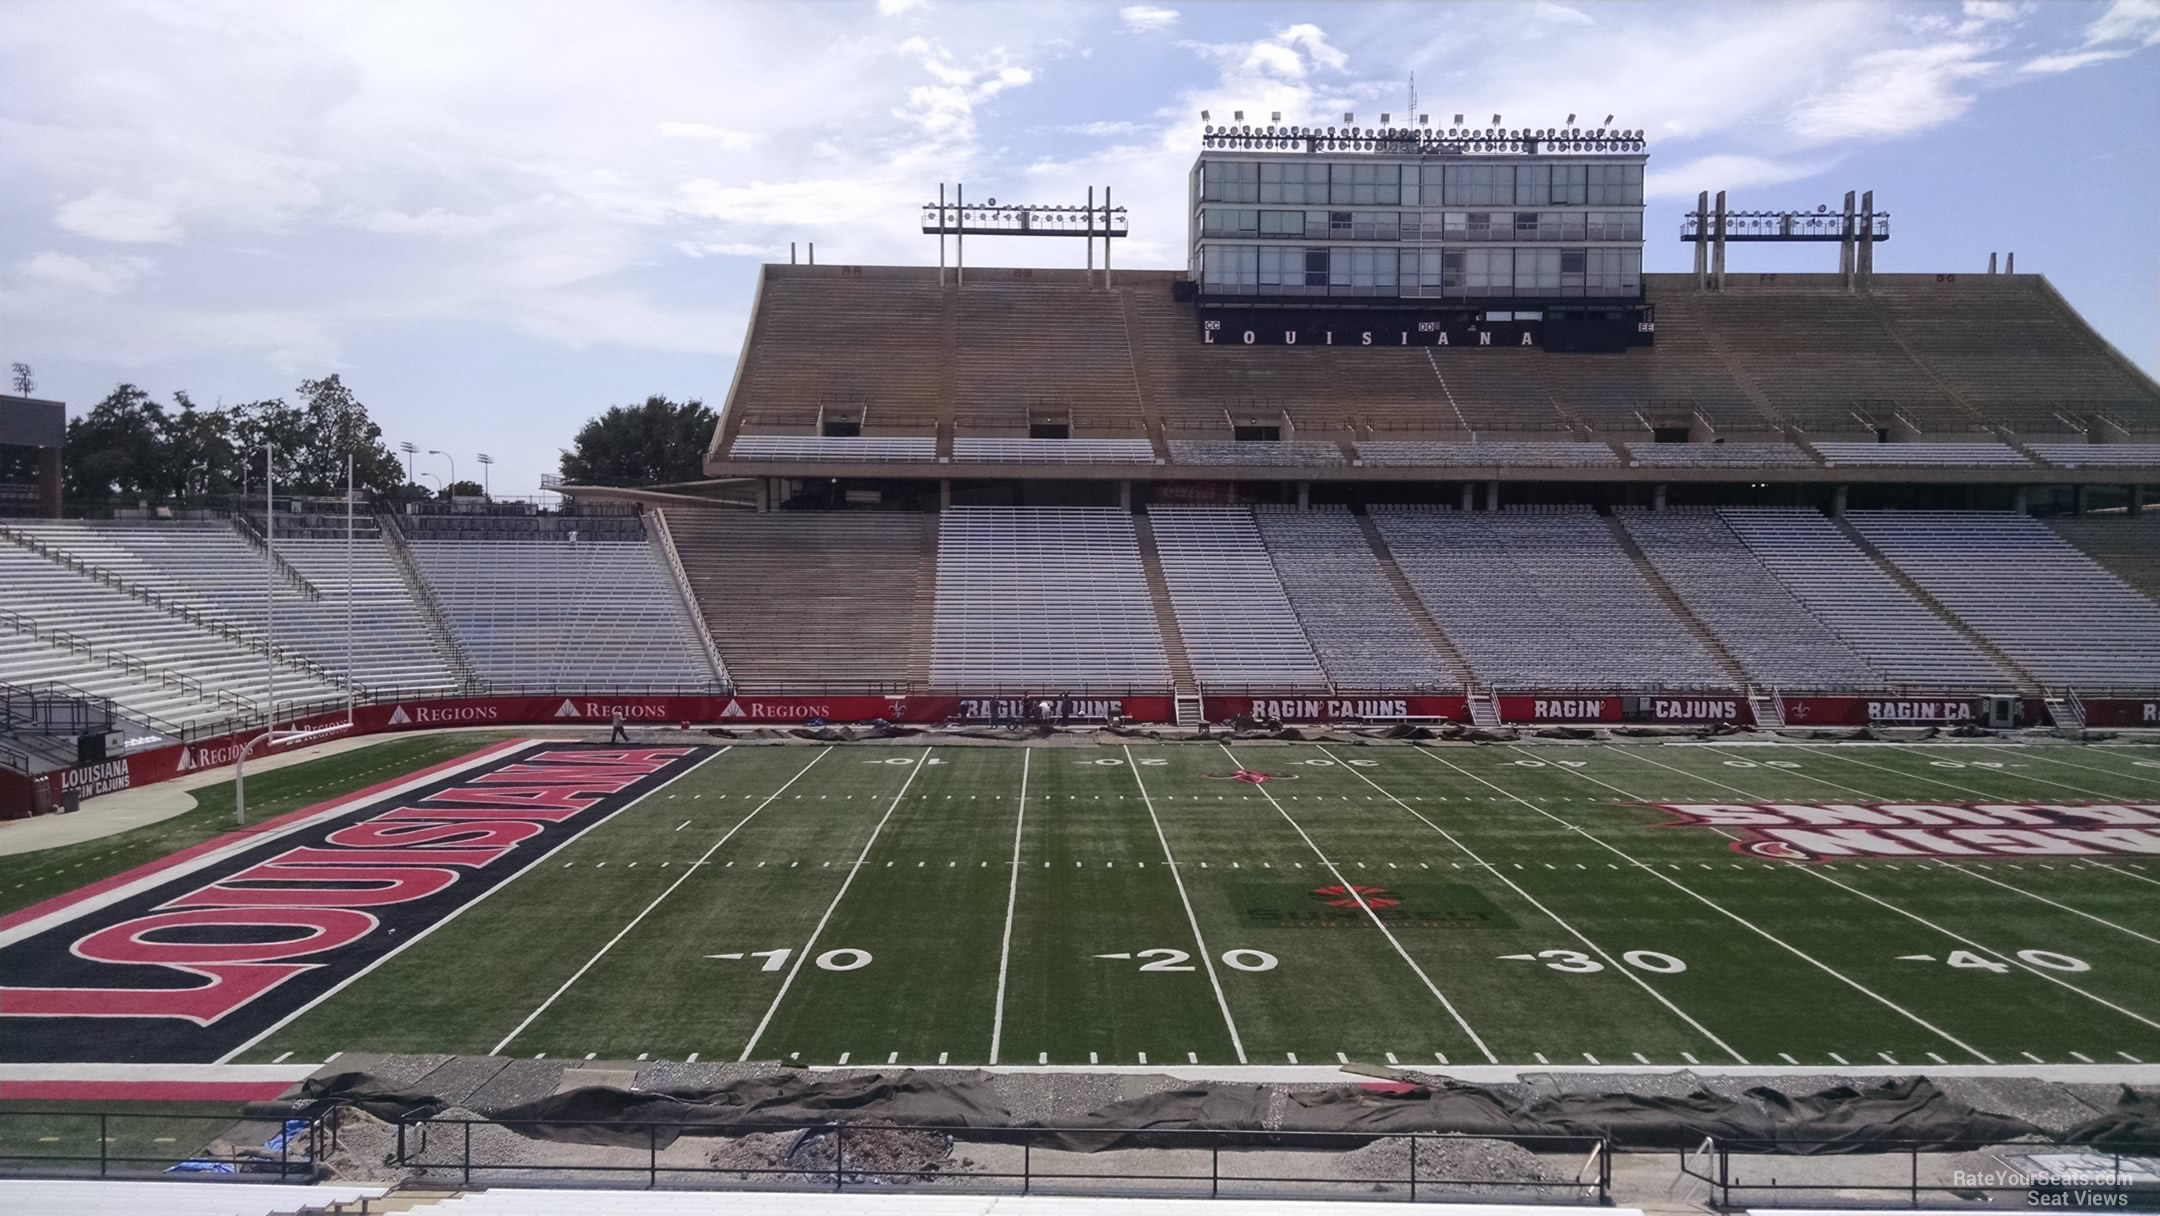 section s, row 30 seat view  - cajun field